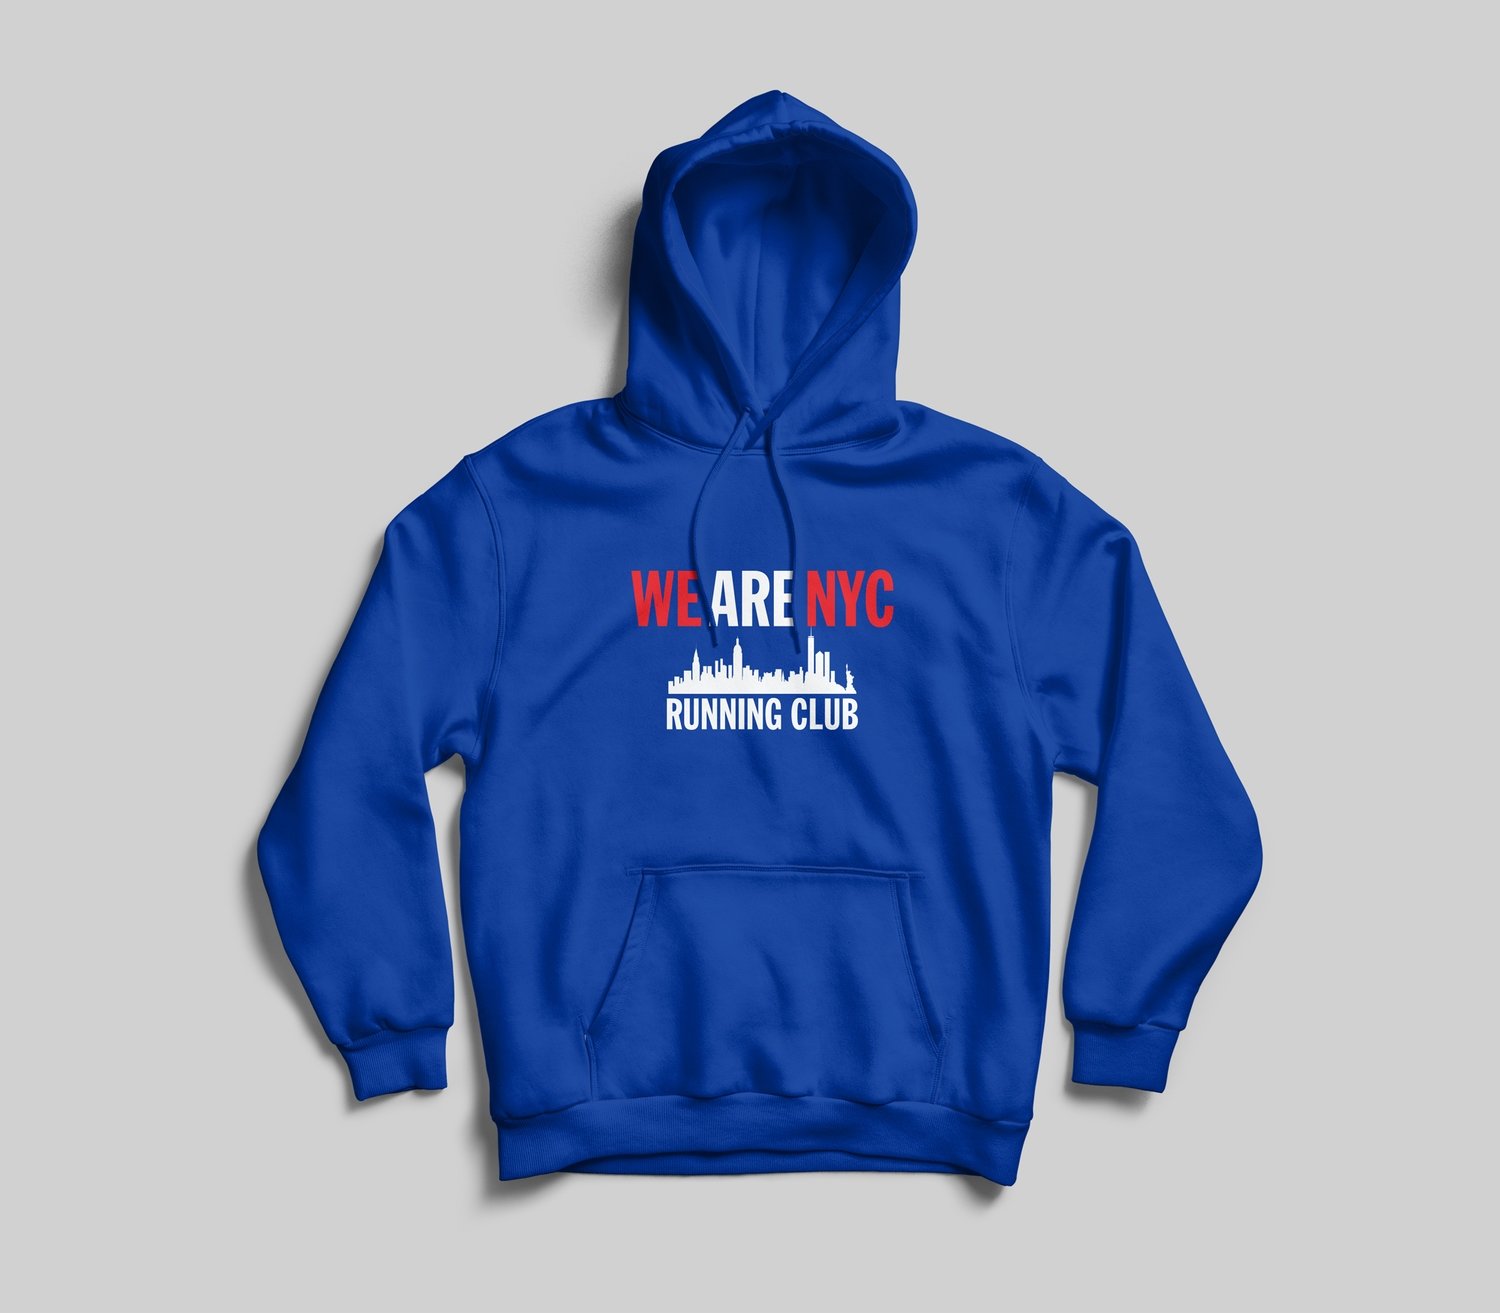 *YOUTH* WE ARE NYC IMPACT LOGO HOODED SWEATSHIRT - AVAILABLE IN 6 COLORS!